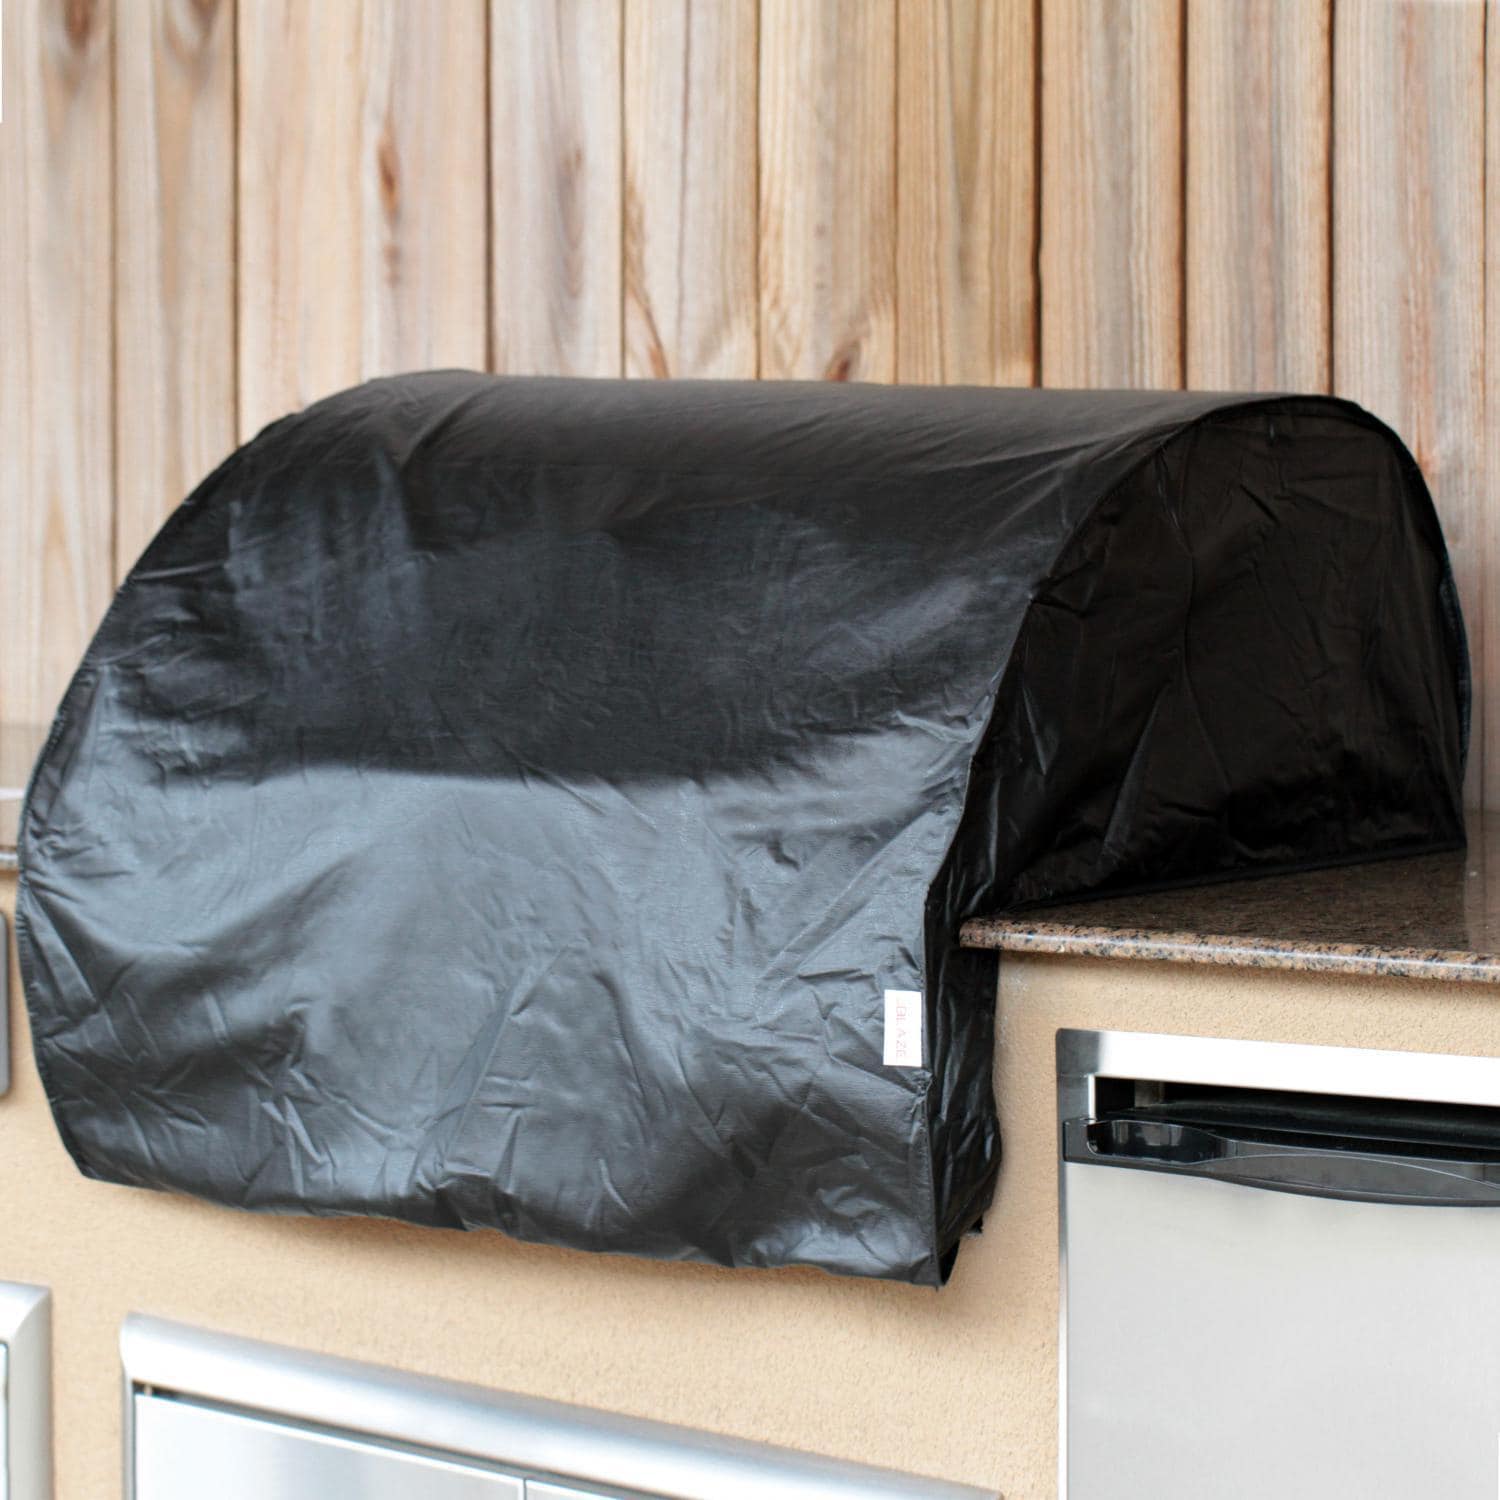 Blaze Grill Cover For Professional LUX 34-Inch Built-In Gas Grills - 3PROBICV - image 1 of 2